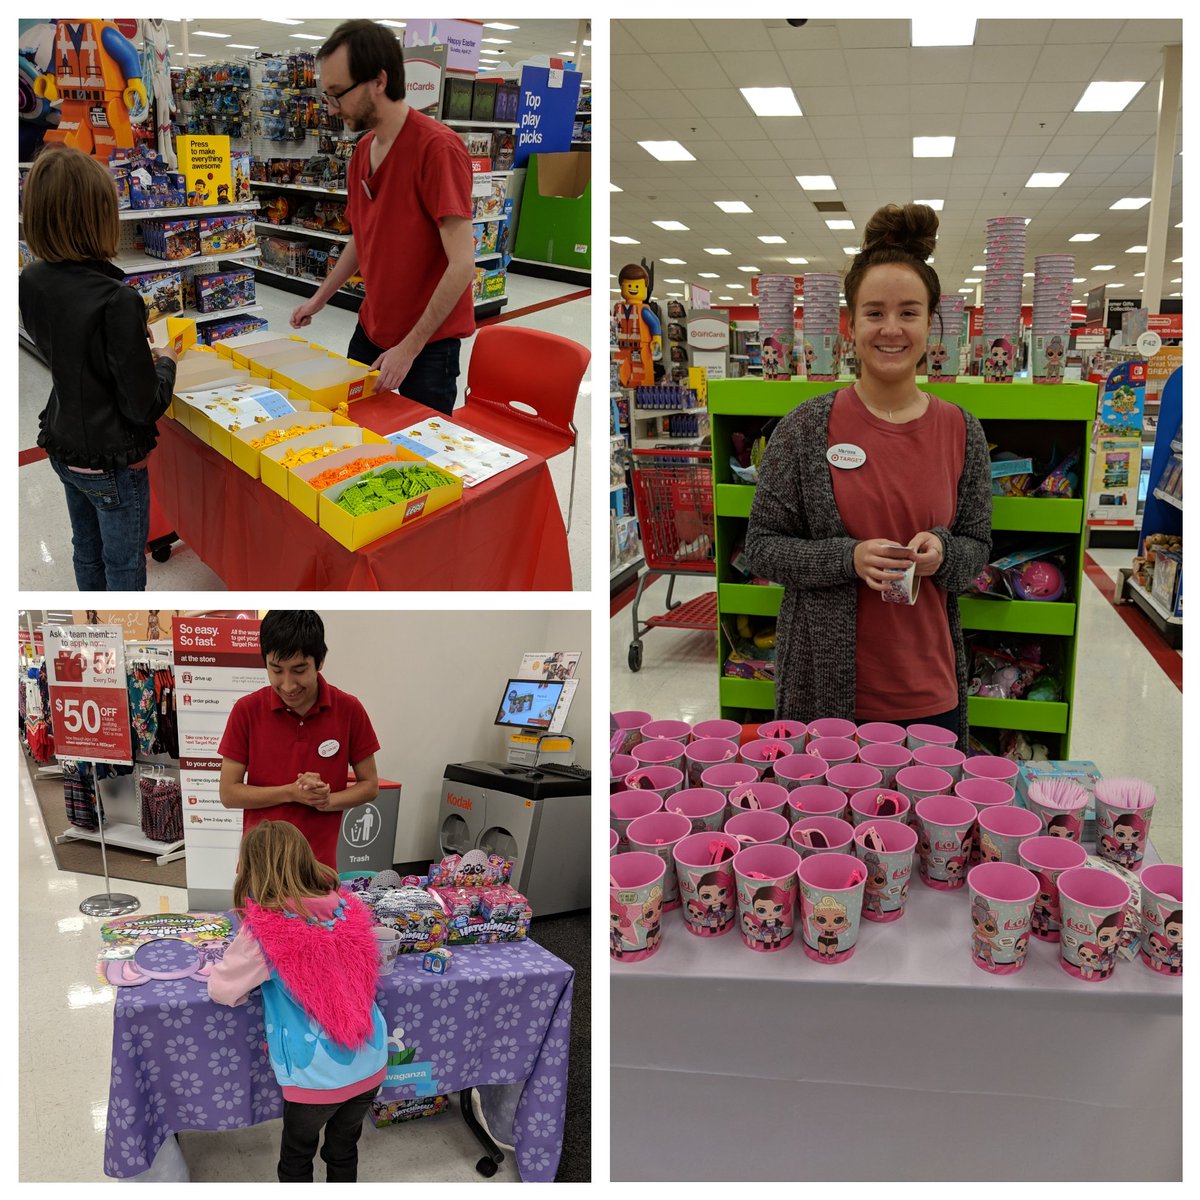 We're not letting this rainy weather stop us from bringing joy to our guests with the #EasterEGGstravaganza event!!! @psjane @Le_Hulett @CRBrookhouser